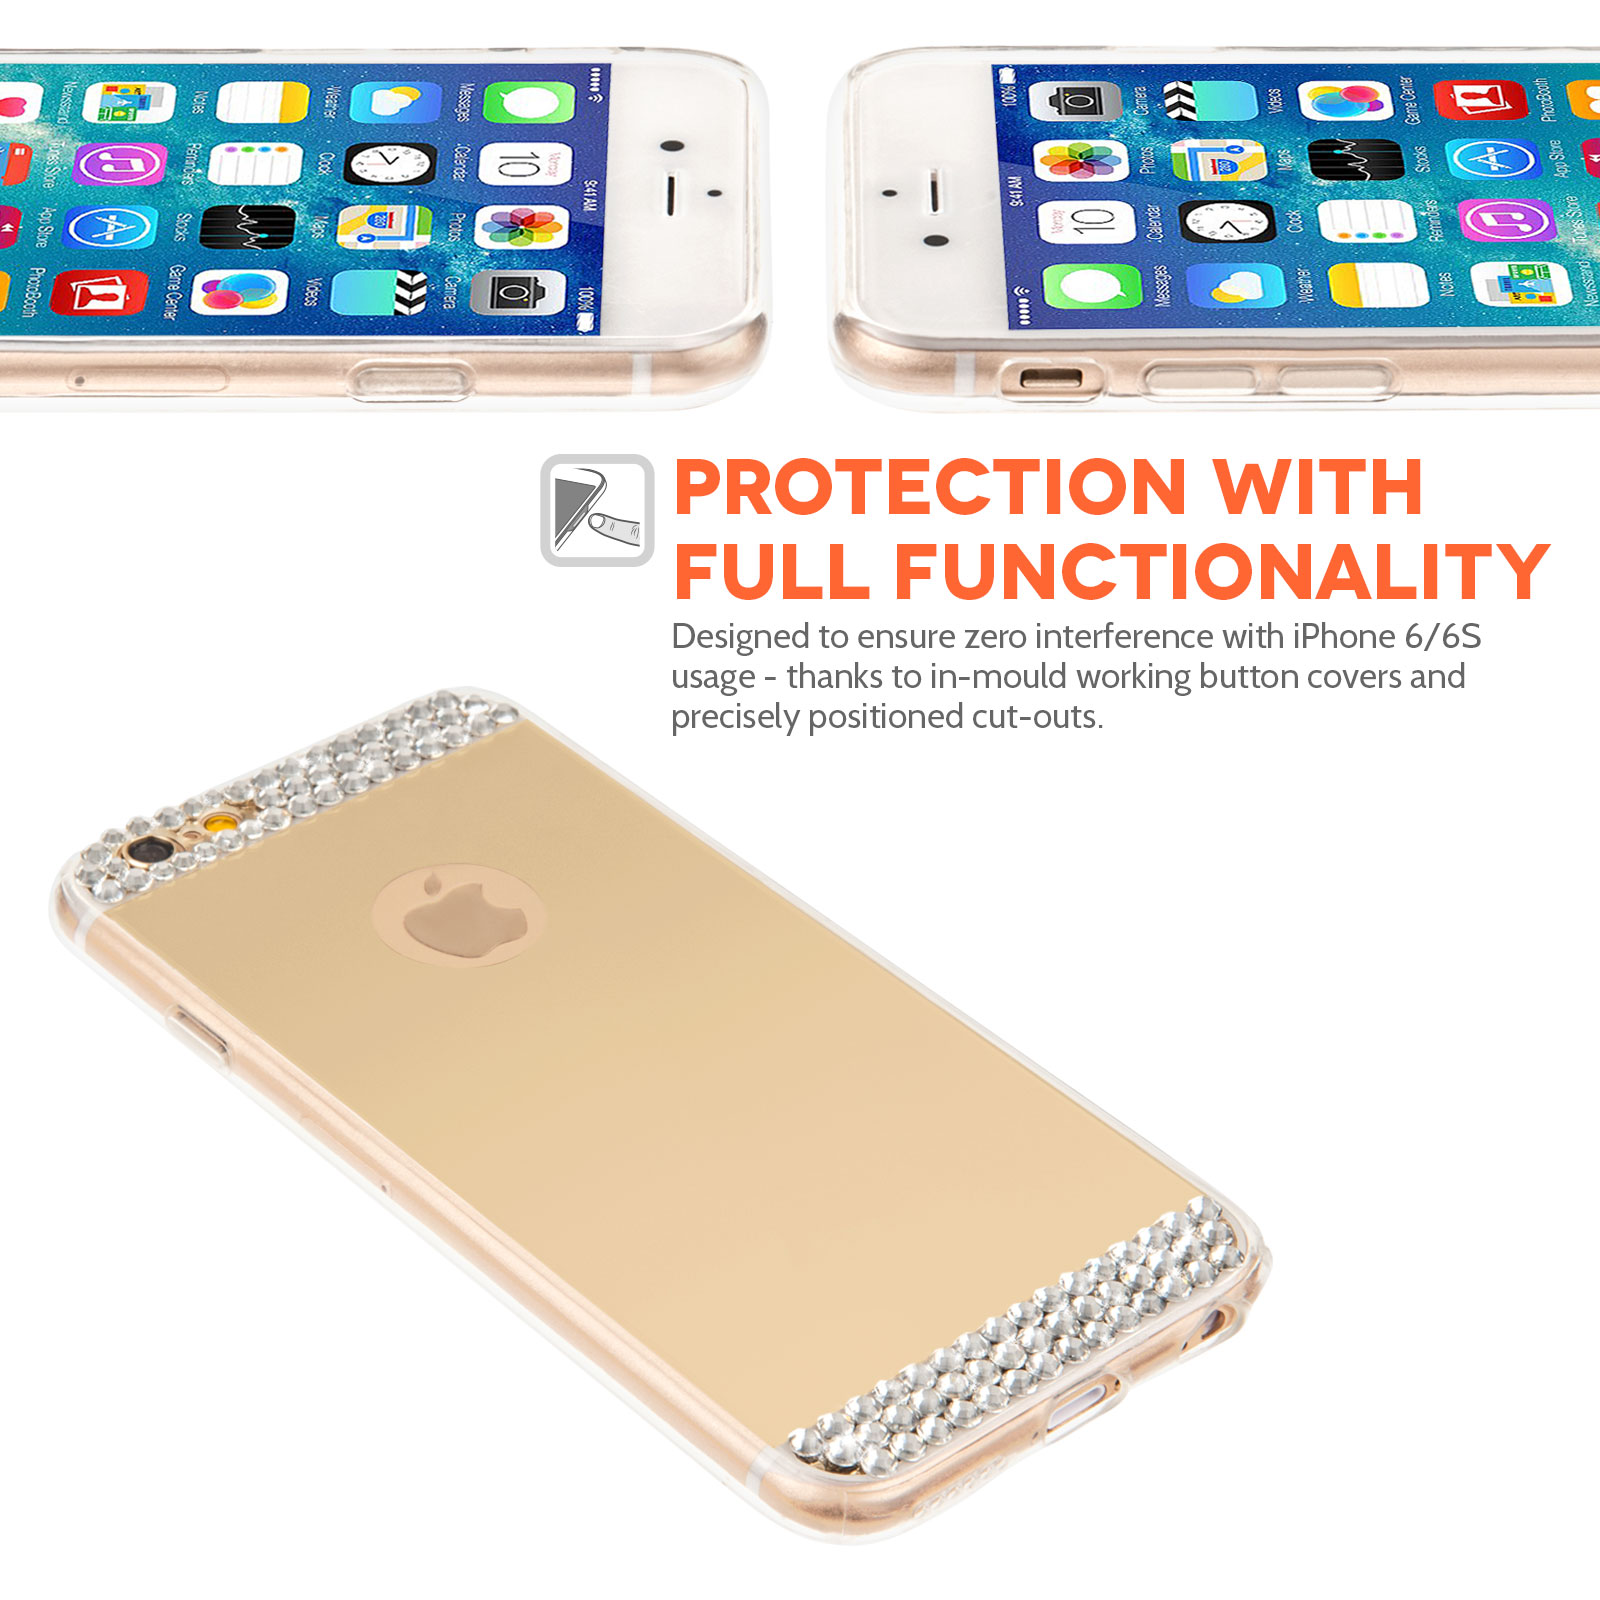 Yousave Accessories iPhone 6 and 6s Mirror Diamond Case - Champagne Gold